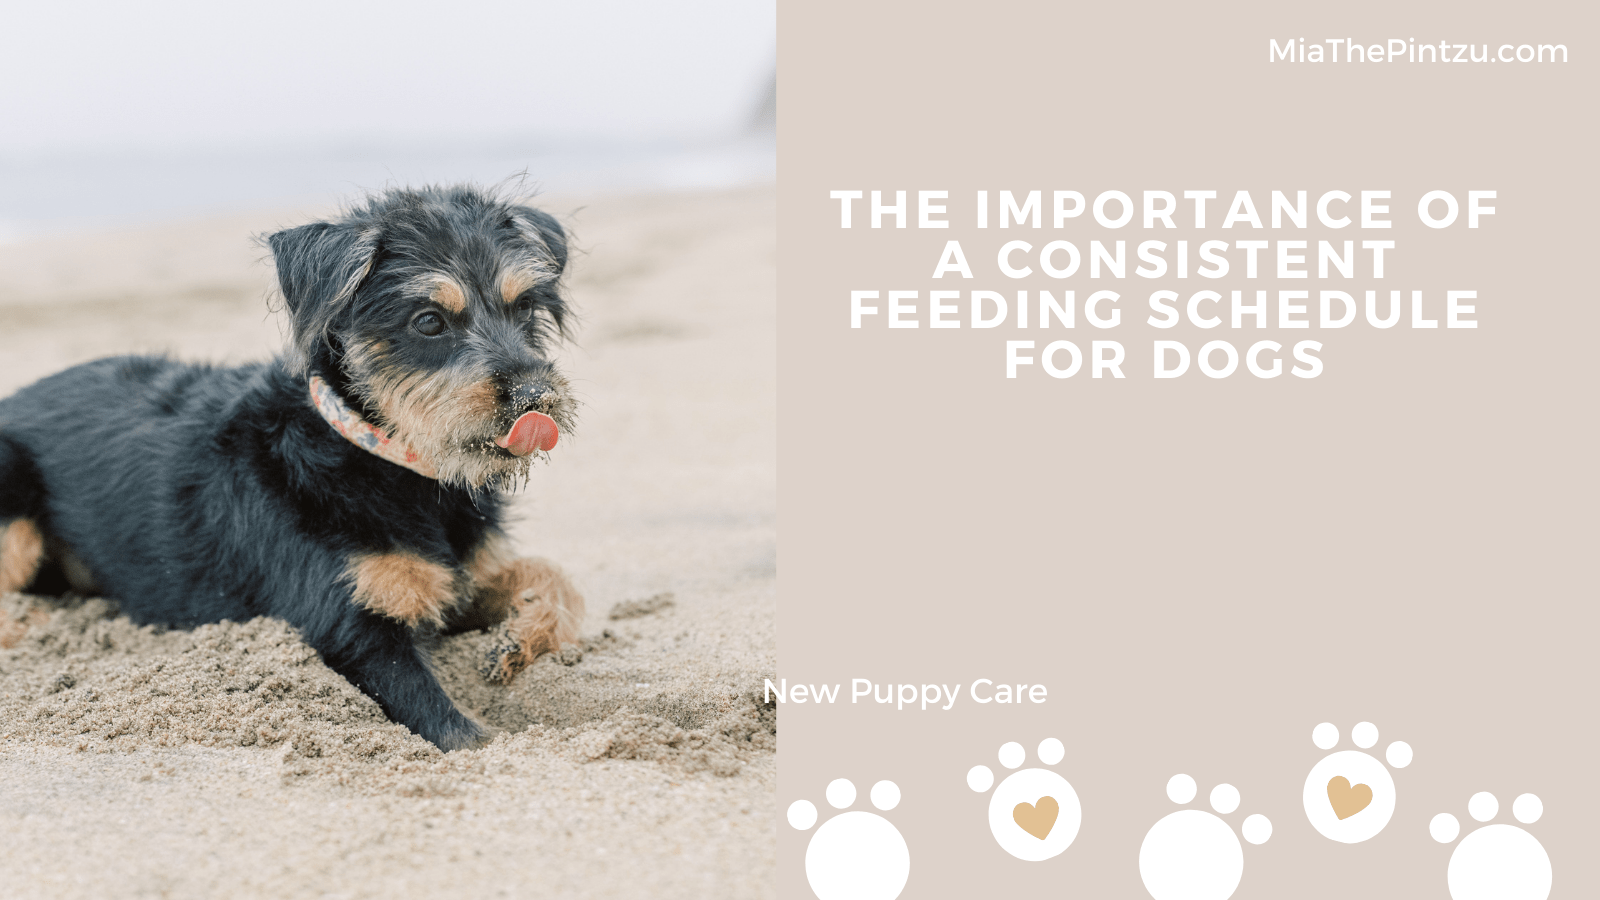 The Importance of a Consistent Feeding Schedule for Dogs